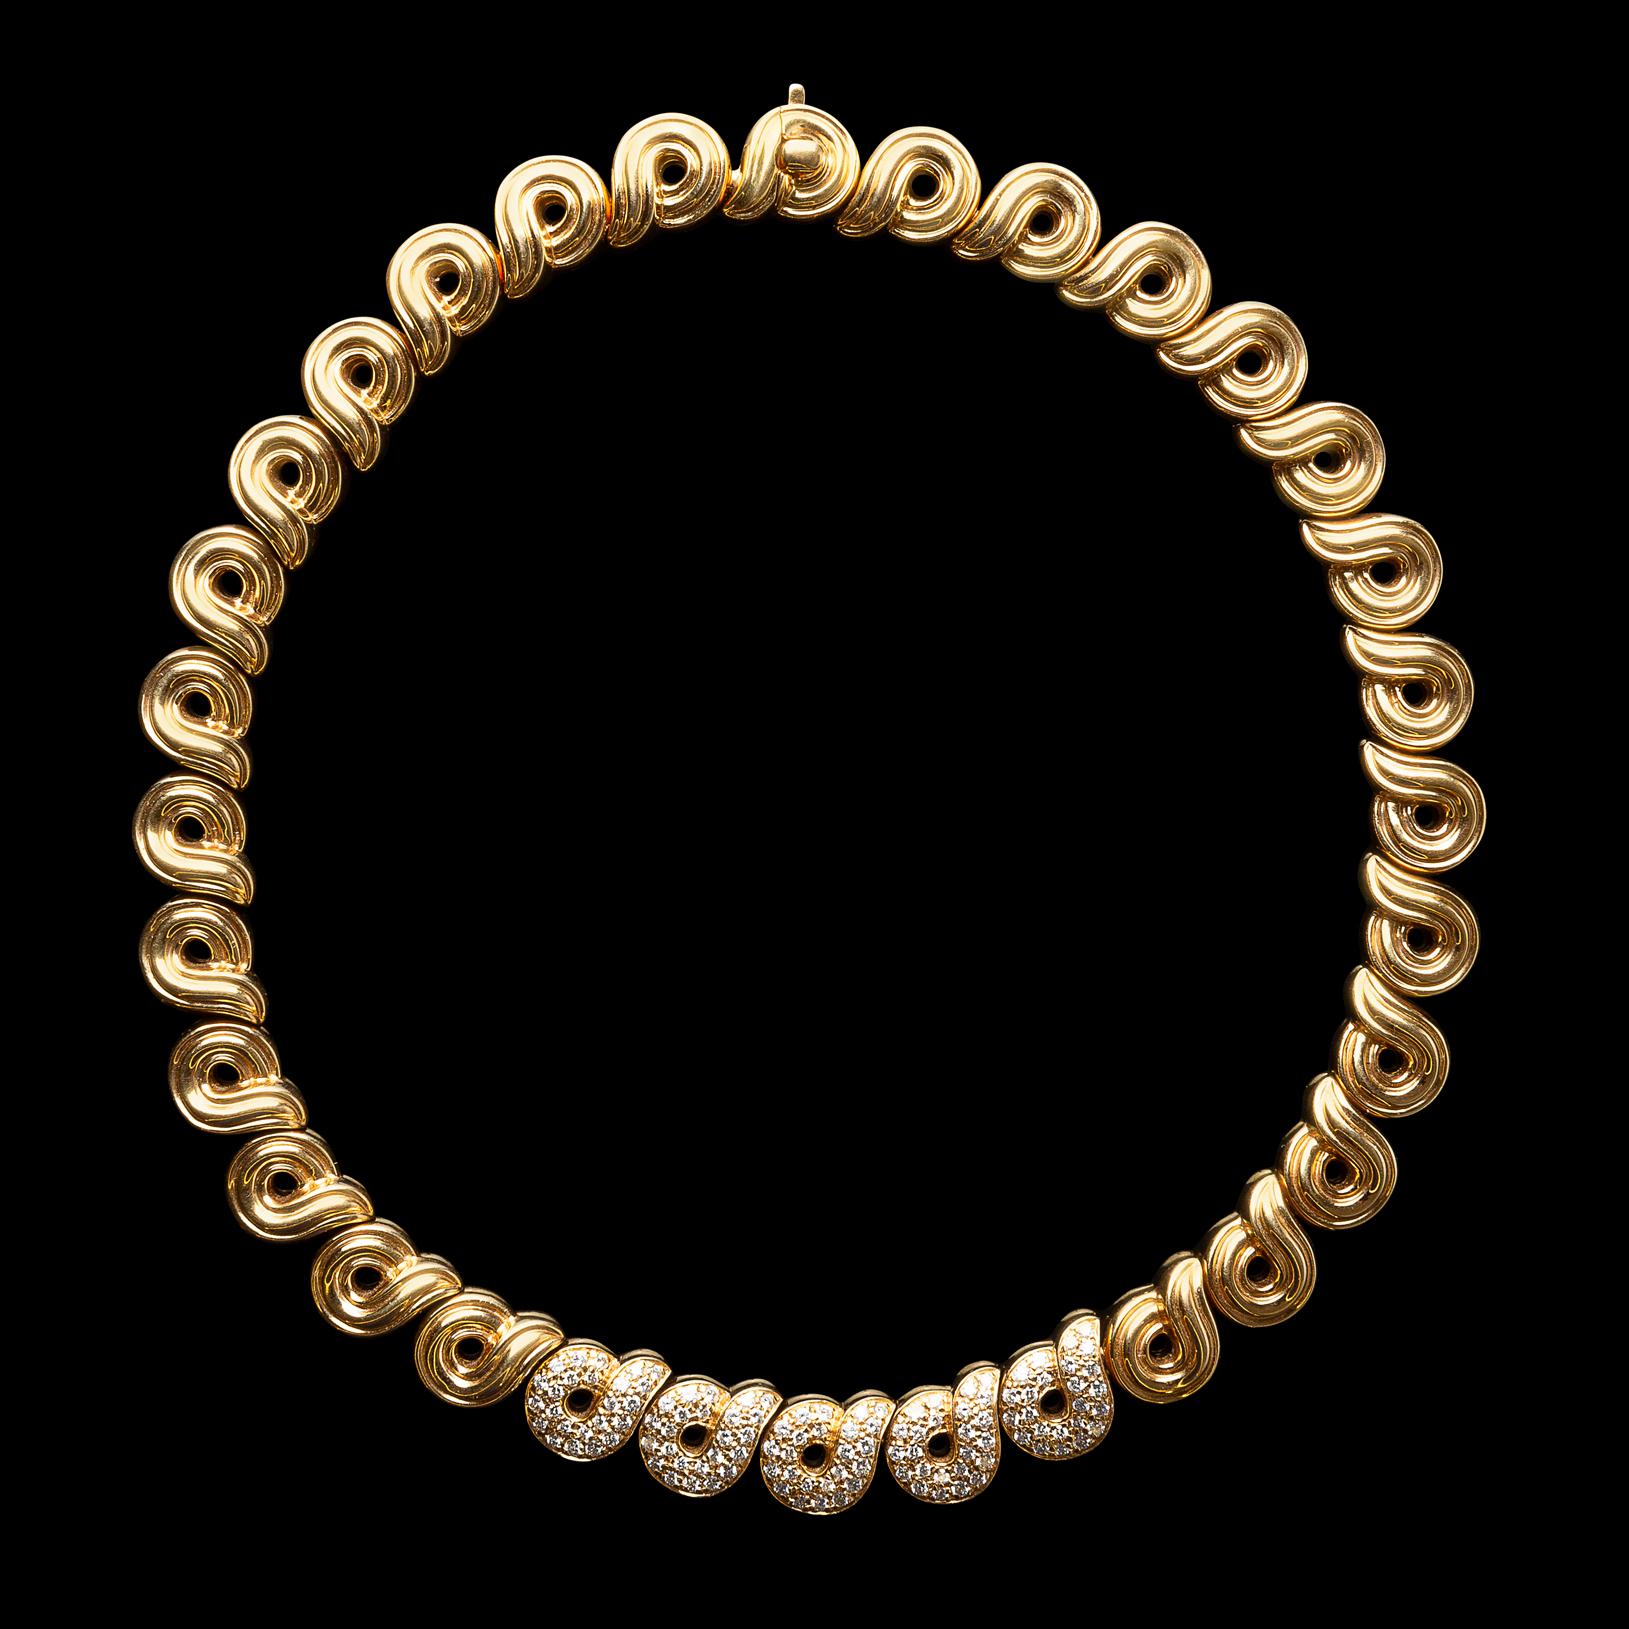 Timeless and elegant, this Boucheron 18k gold collar necklace is designed with spiral links, the central links pave-set with 120 round brilliant-cut diamonds, weighing in total approximately 3.00 carats, F-G/VS. The necklace weighs 118 grams, and